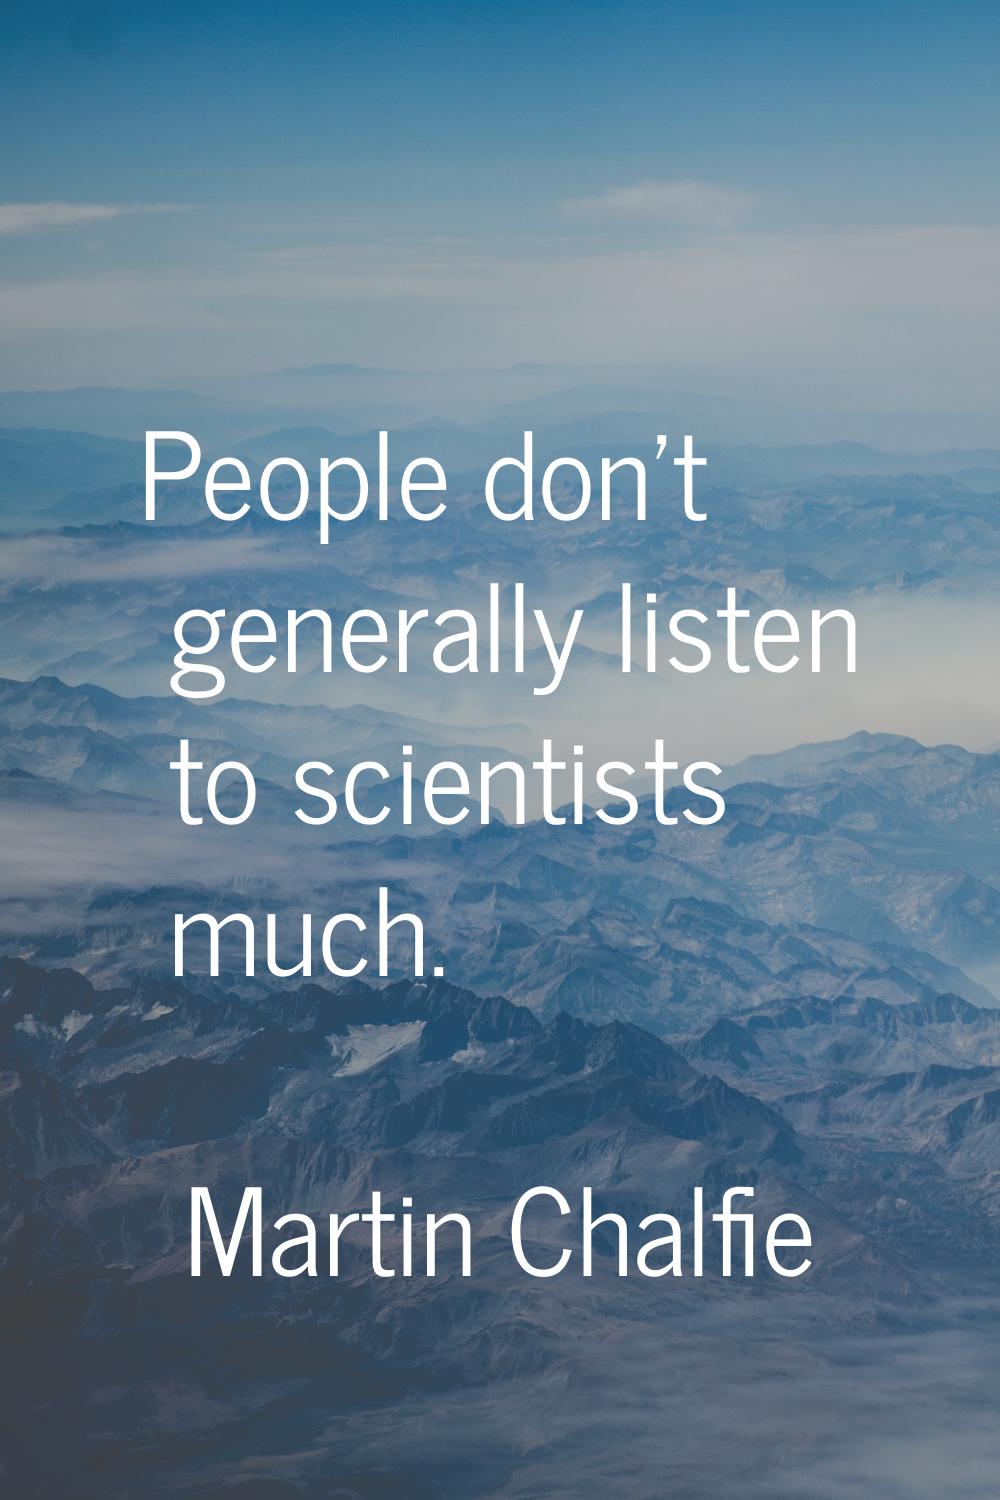 People don't generally listen to scientists much.